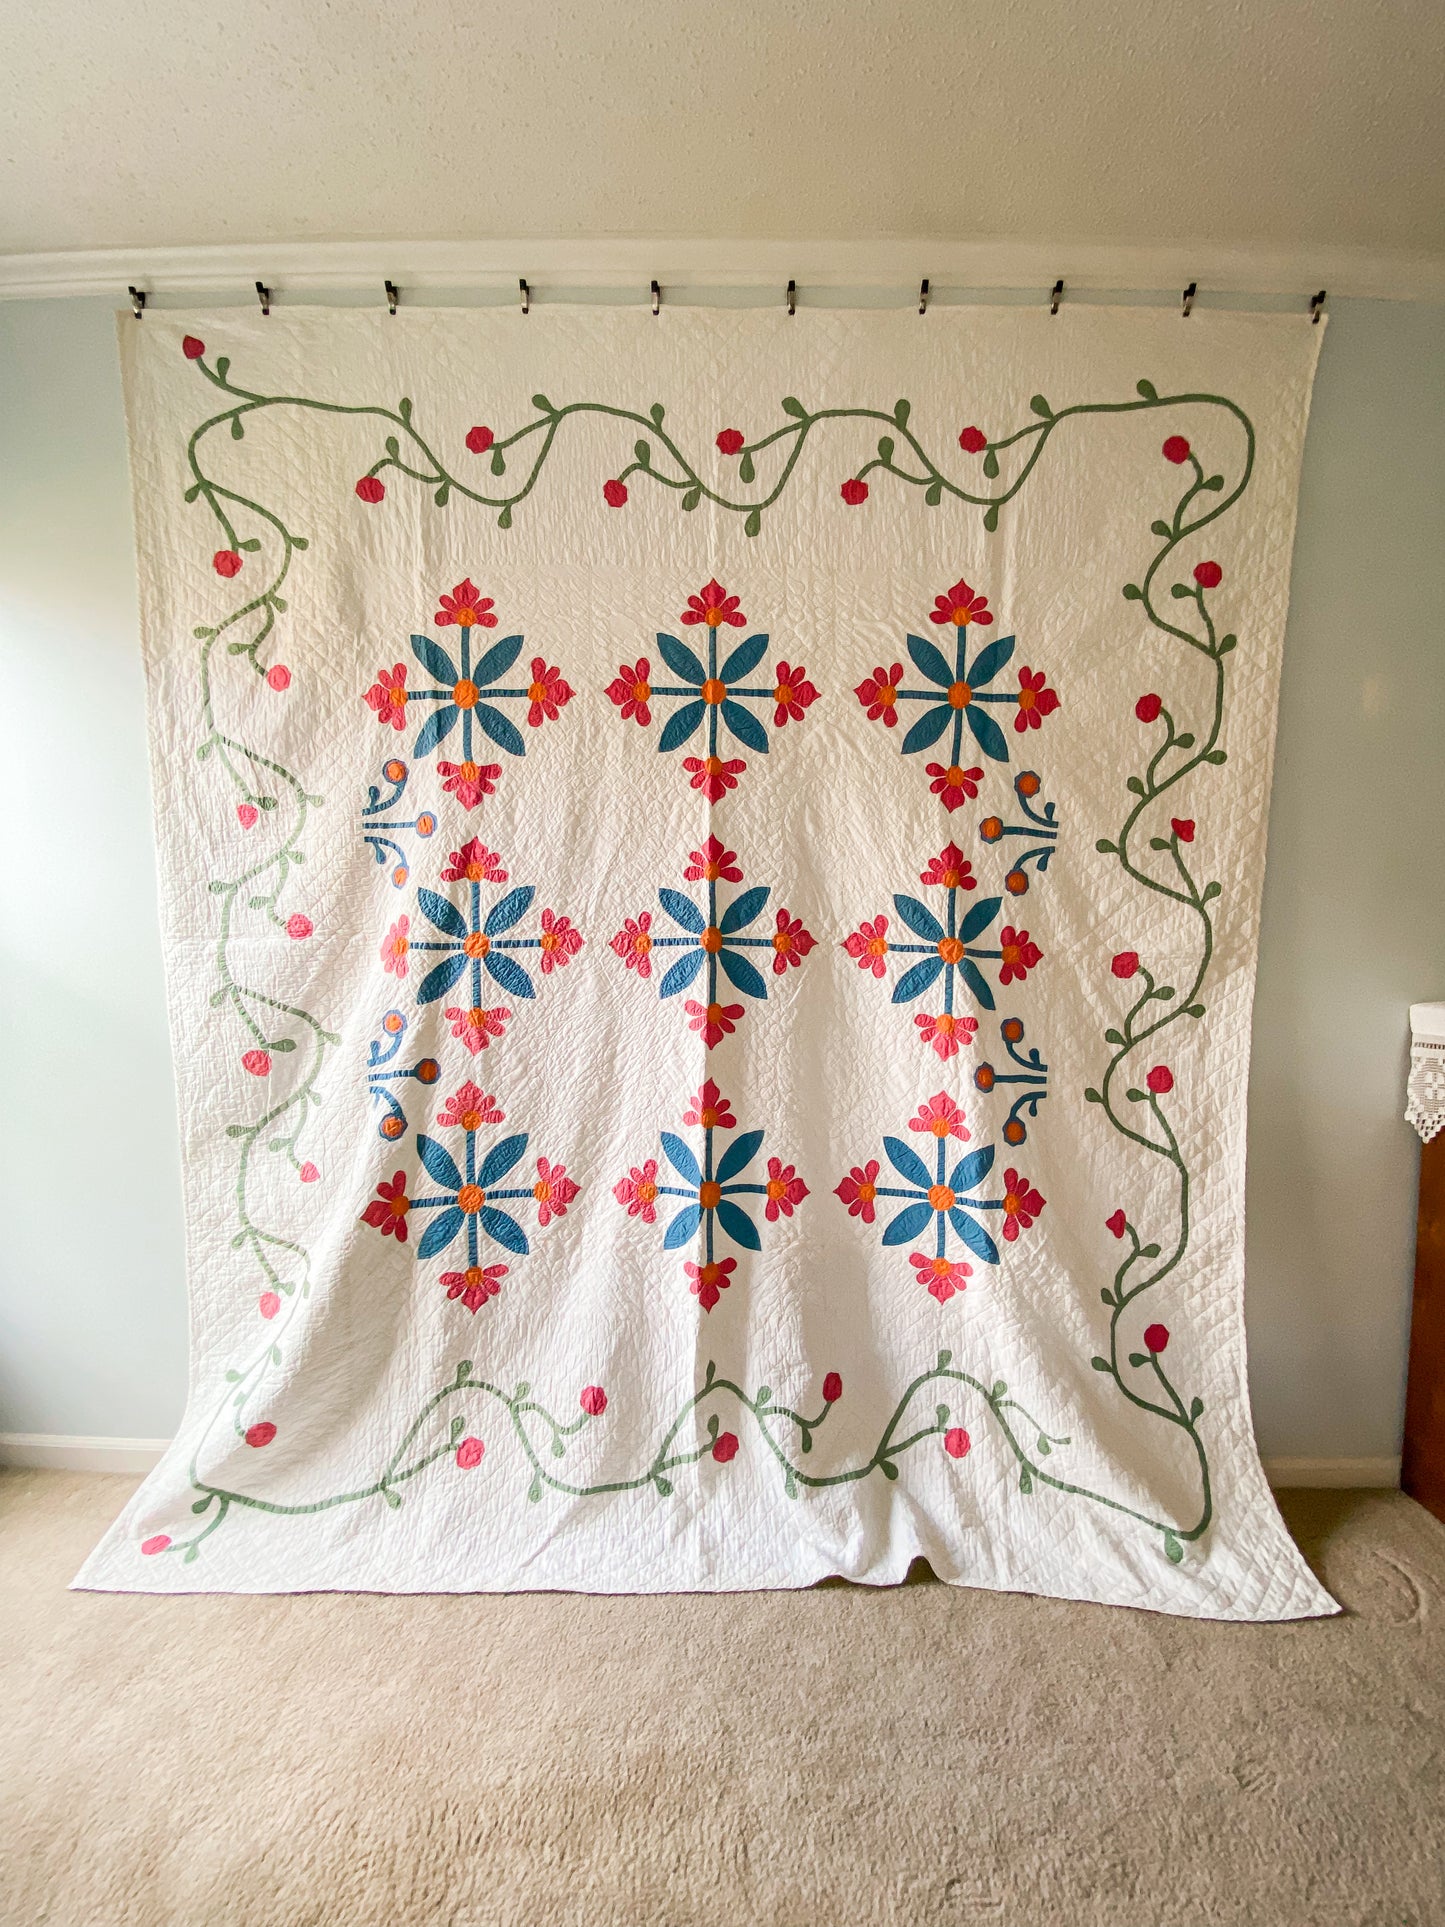 Vintage Meadow Daisy Applique Quilt in Blue, Pink and Green, c1930